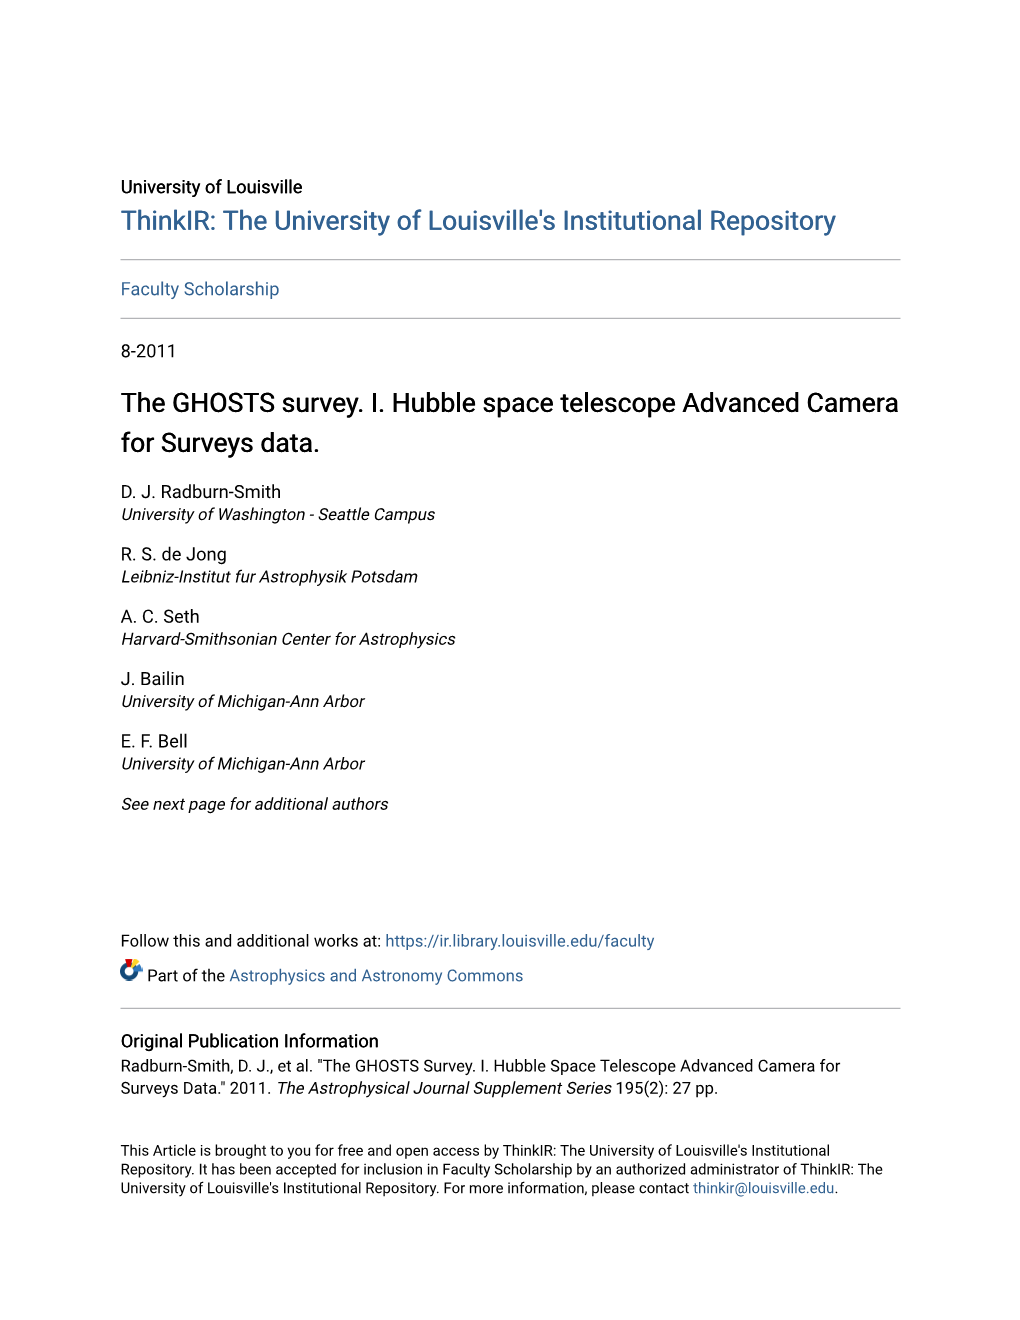 The GHOSTS Survey. I. Hubble Space Telescope Advanced Camera for Surveys Data